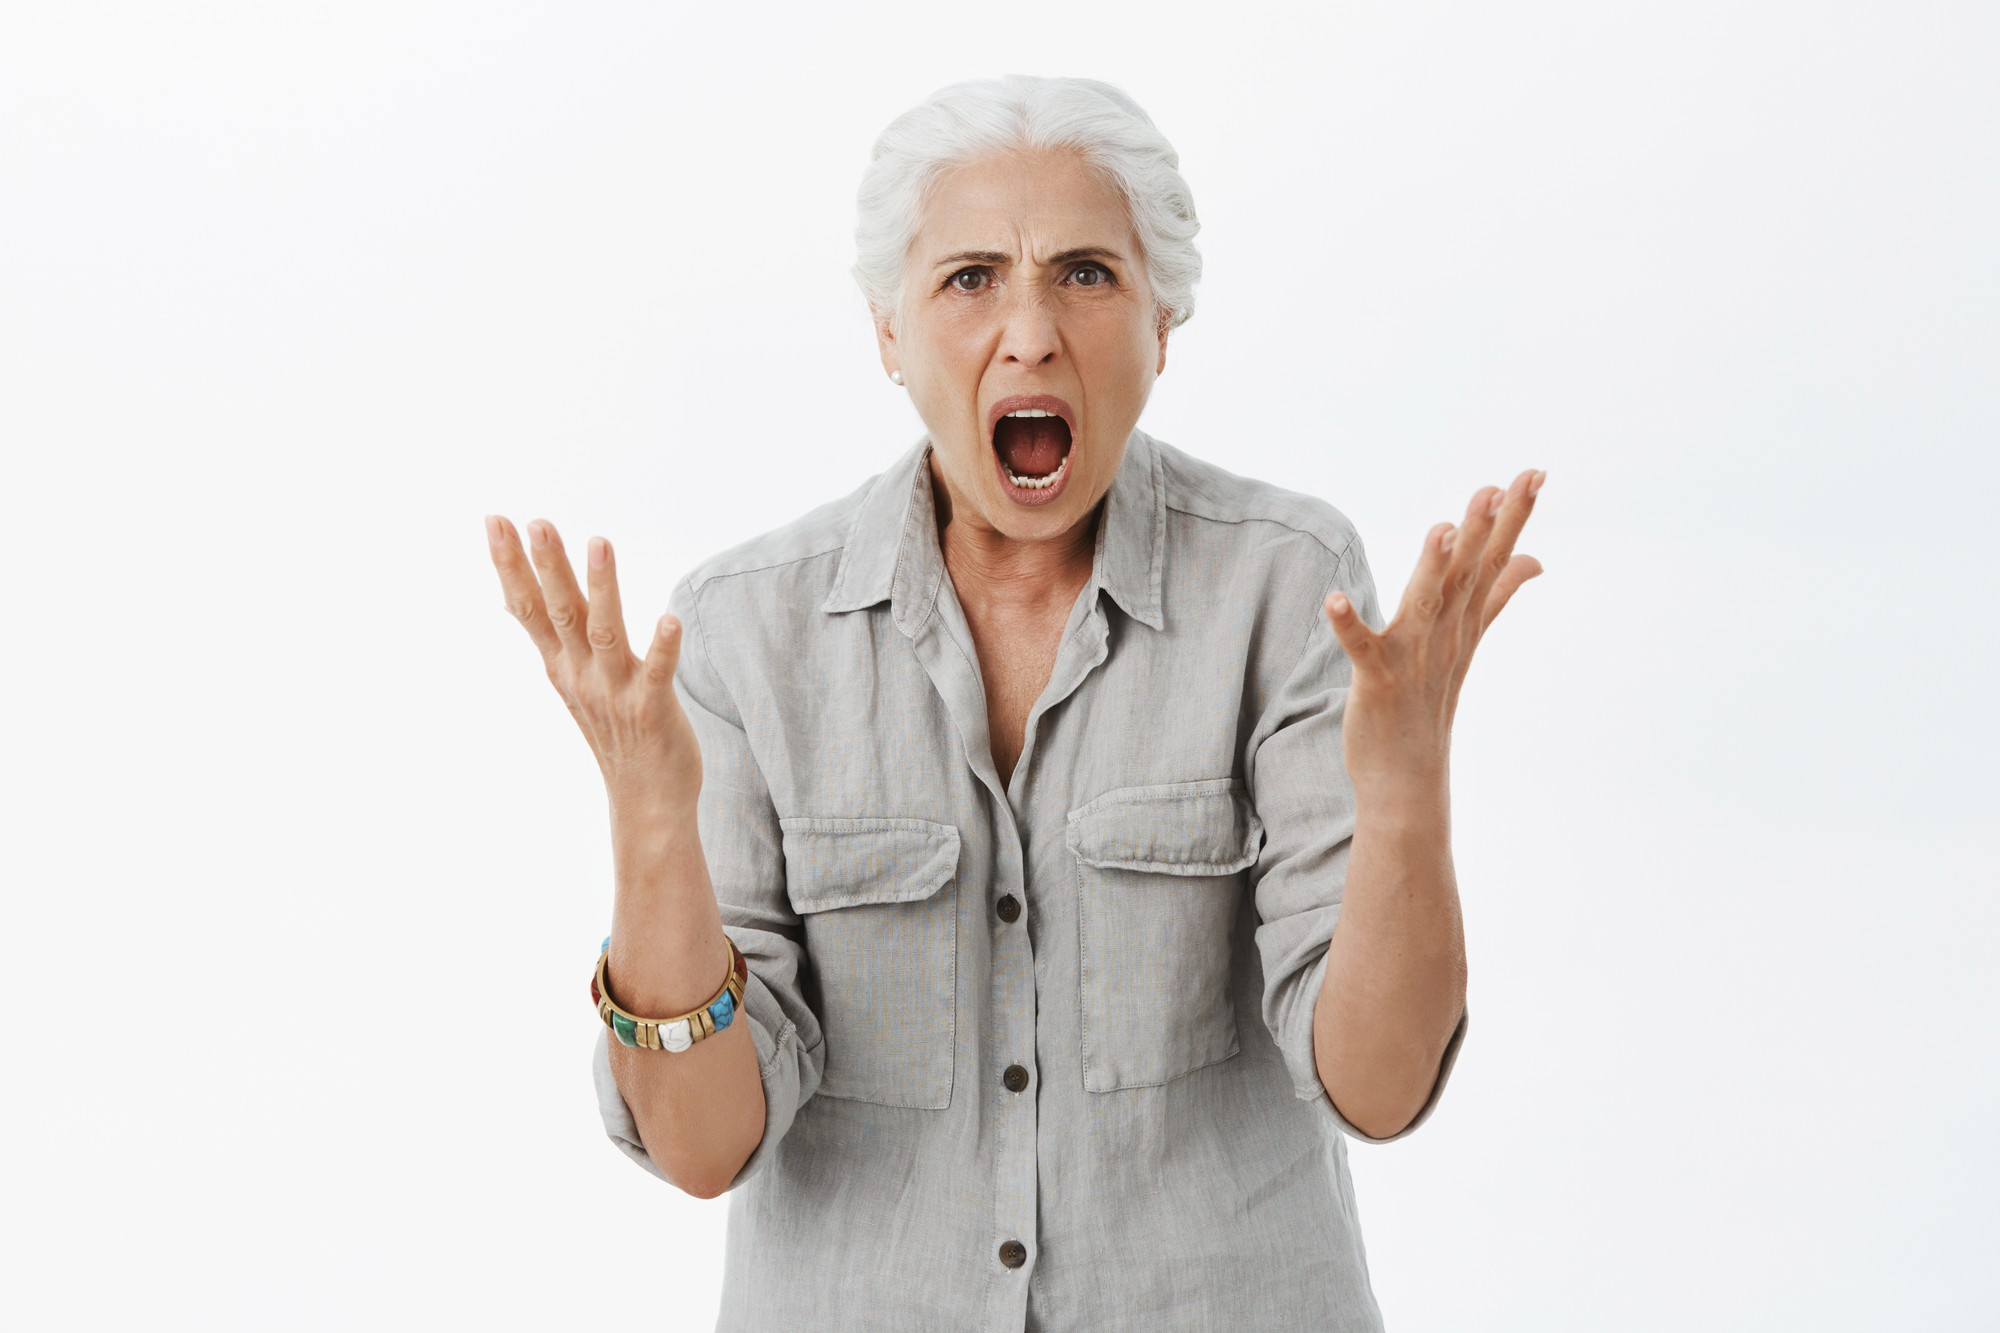 An upset older woman gesturing with her hands while shouting | Source: Freepik